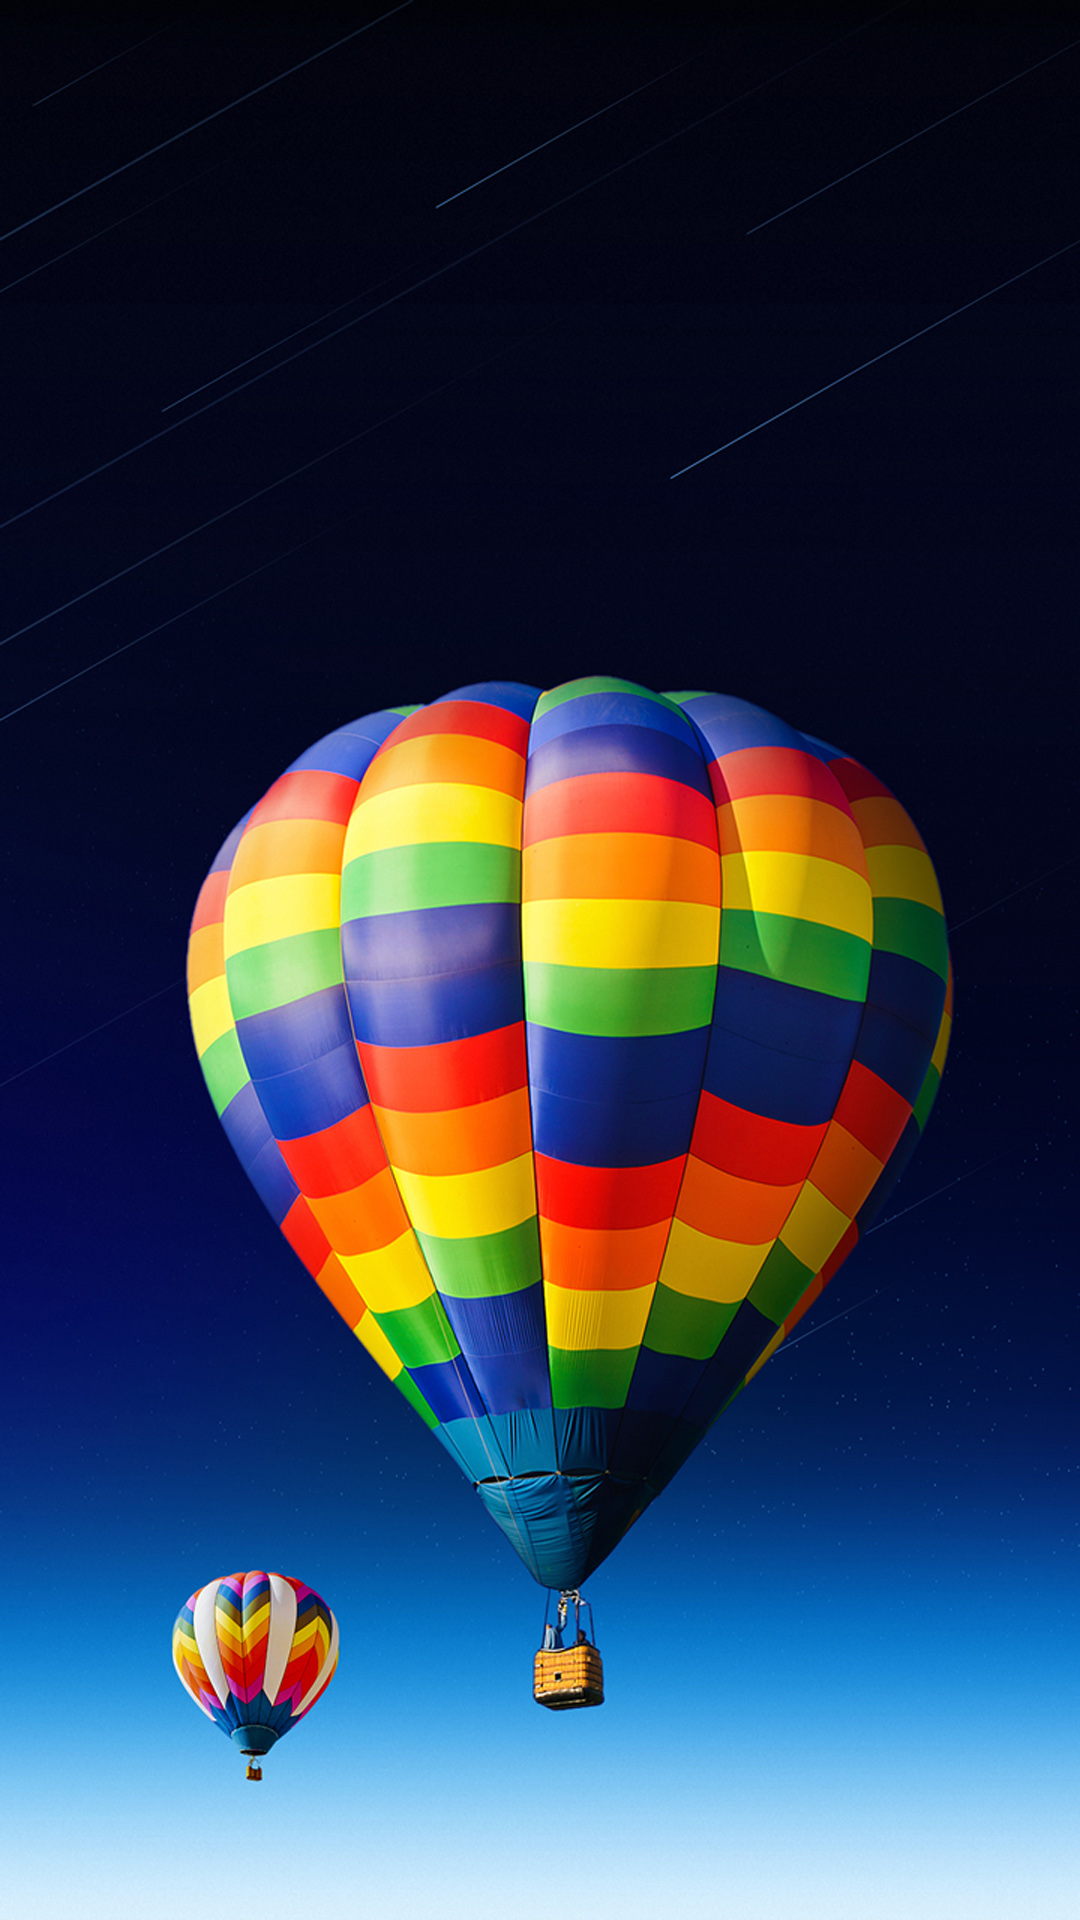 Nice colored hot-air balloon iphone 6 plus wallpaper | iPhone 6 ...